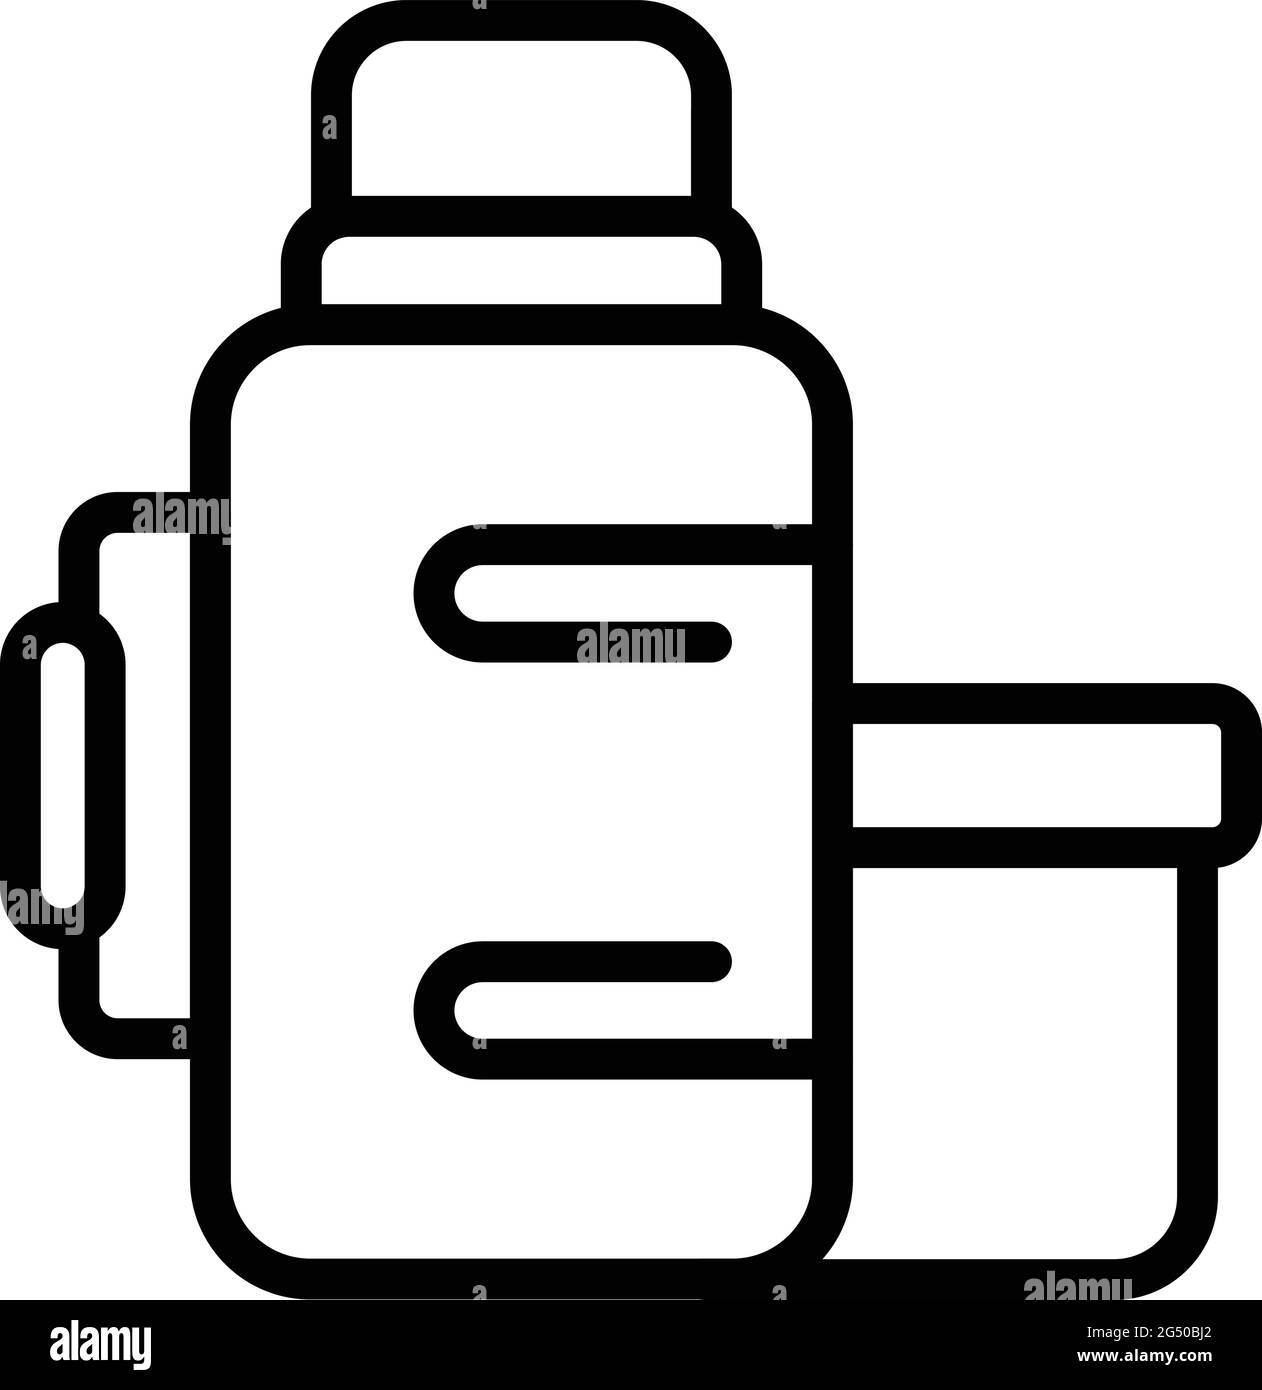 Image Details IST_22196_54173 - Camping thermo bottle icon. Outline camping  thermo bottle vector icon for web design isolated on white background.  Camping thermo bottle icon, outline style